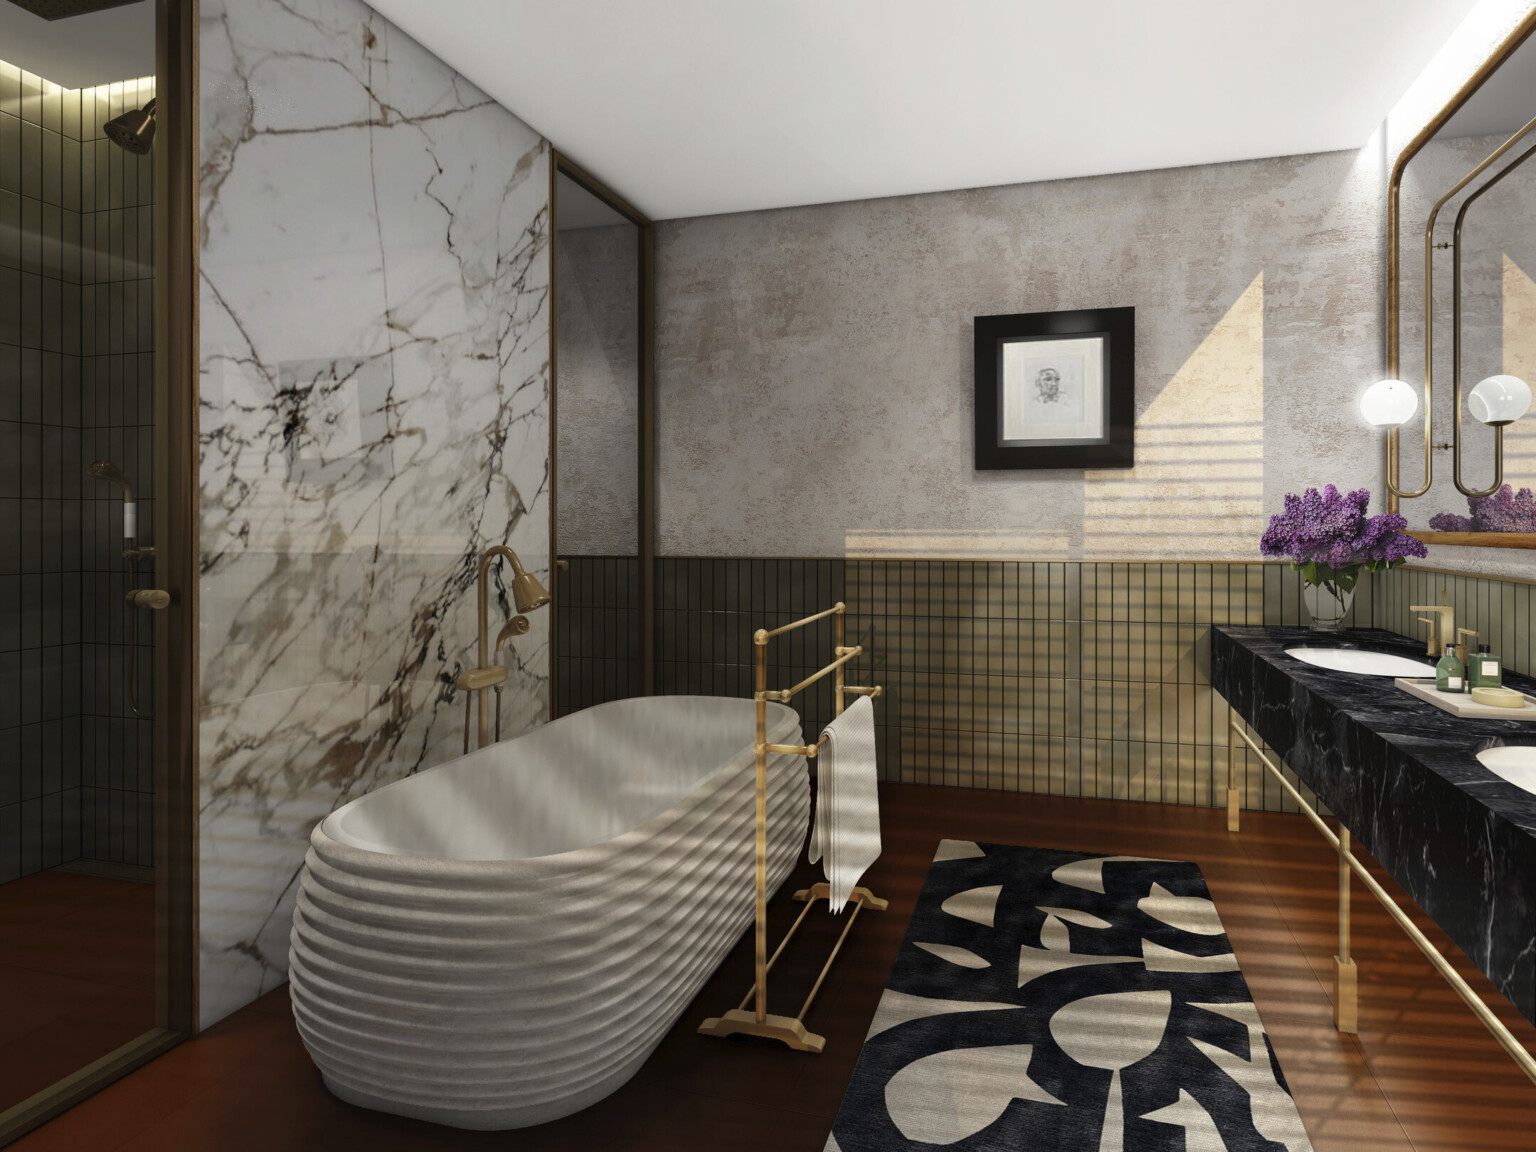 Bathroom with mix of dark and white marble on counters and wall, earth tone tile and textural wall, ribbed white stone tub